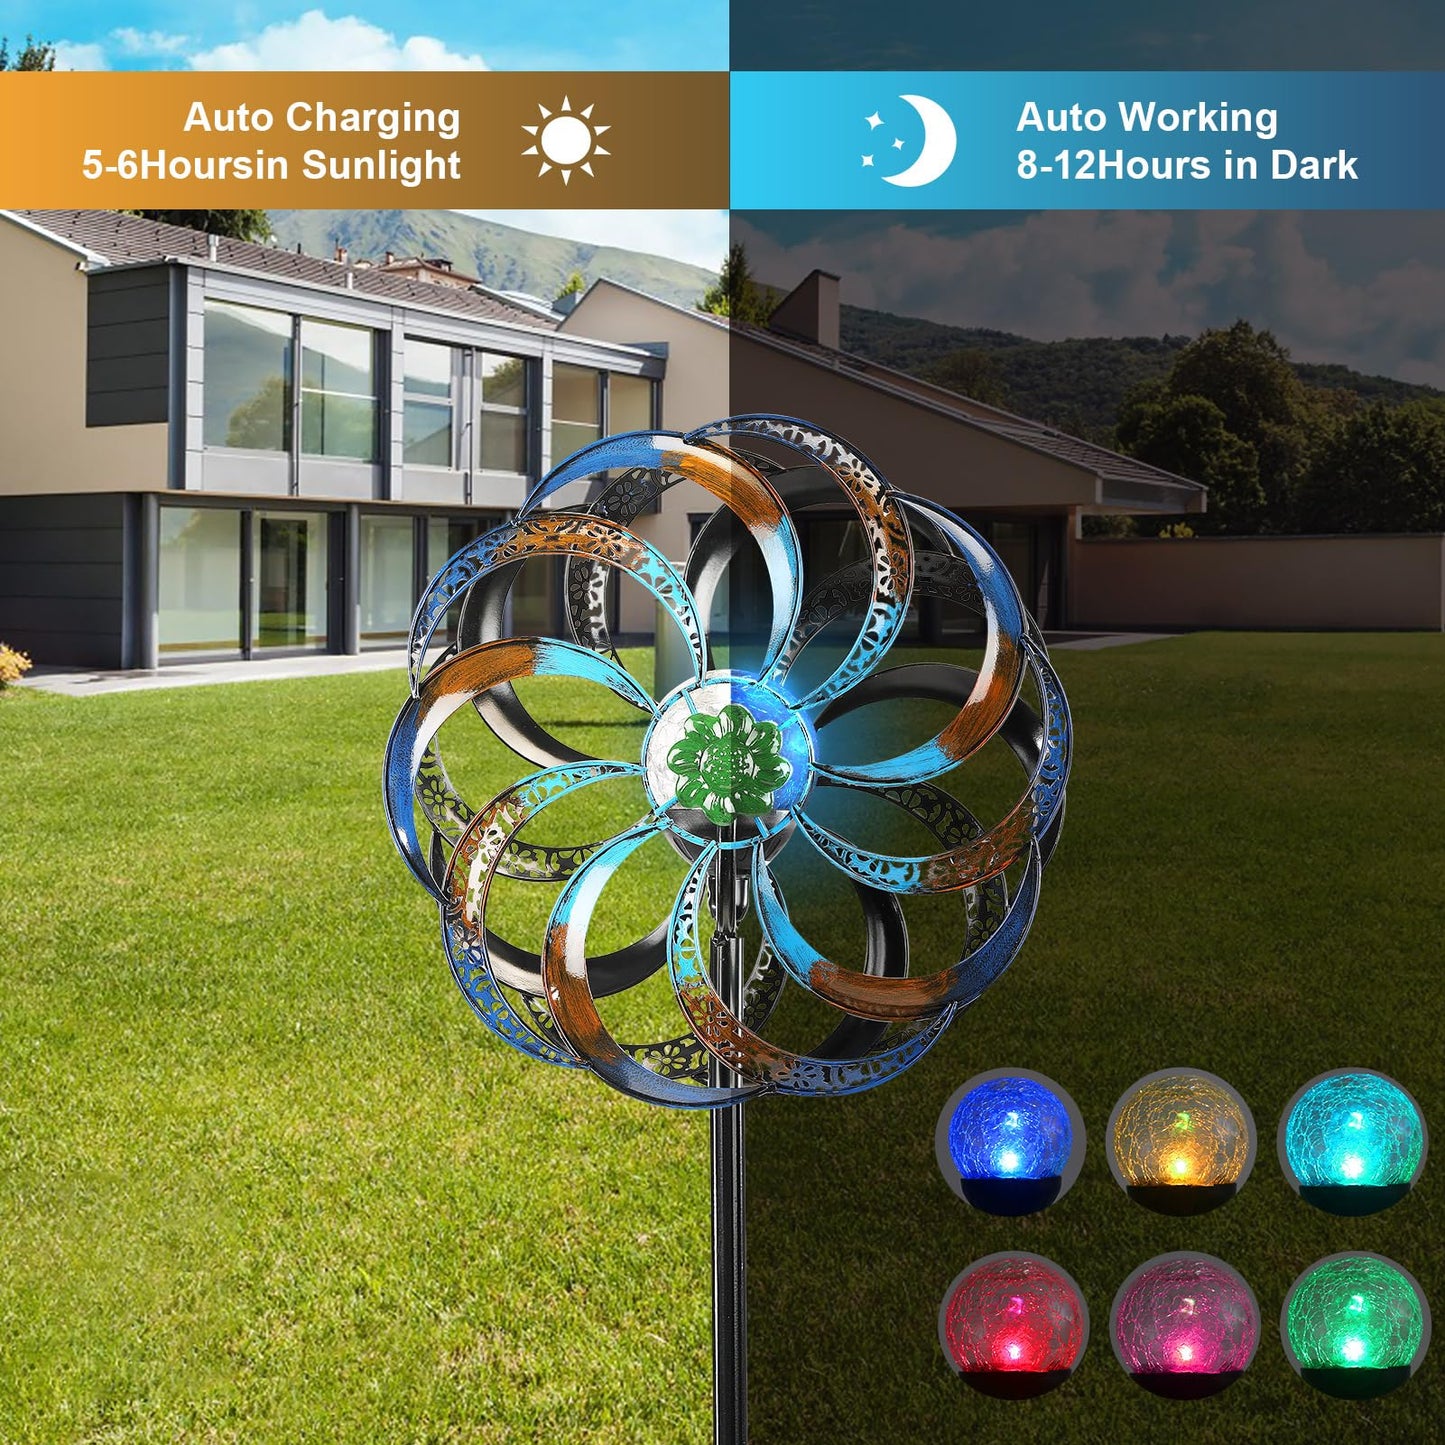 Wind Spinners for Yard and Garden Large-Wind Sculptures & Spinners-Metal Yard Kinetic Wind Spinner Art 75 in Multi-Color Led Glass Ball for Patios Parks Sidewalks Backyard Lawn Decorations